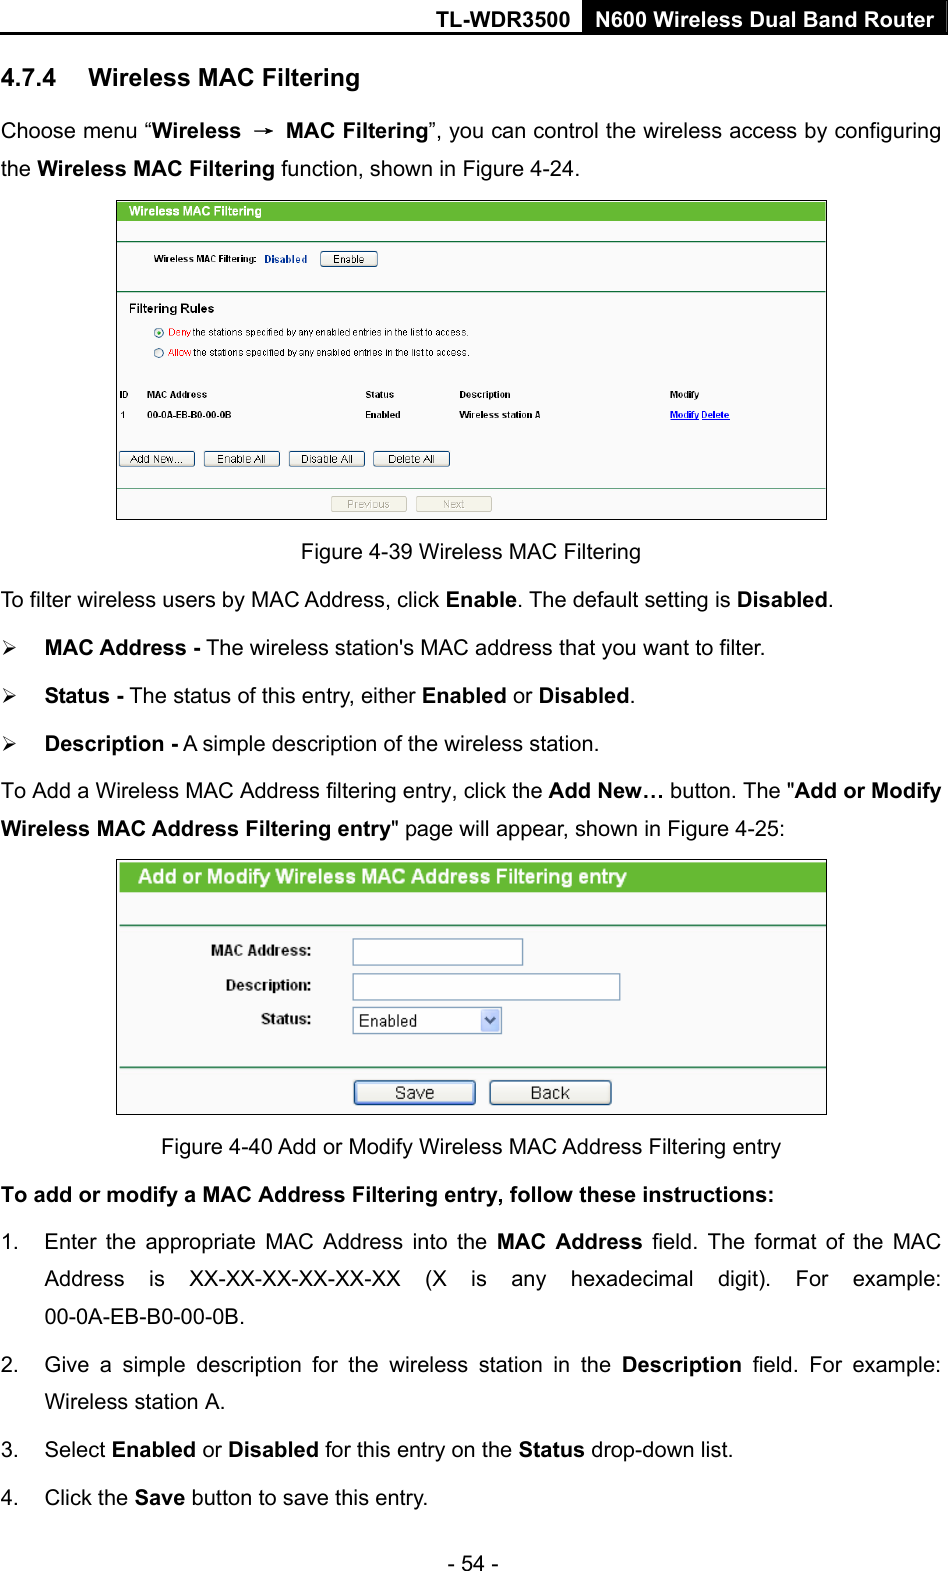 TL-WDR3500 N600 Wireless Dual Band Router - 54 - 4.7.4  Wireless MAC Filtering   Choose menu “Wireless  → MAC Filtering”, you can control the wireless access by configuring the Wireless MAC Filtering function, shown in Figure 4-24.  Figure 4-39 Wireless MAC Filtering To filter wireless users by MAC Address, click Enable. The default setting is Disabled.  MAC Address - The wireless station&apos;s MAC address that you want to filter.    Status - The status of this entry, either Enabled or Disabled.  Description - A simple description of the wireless station.   To Add a Wireless MAC Address filtering entry, click the Add New… button. The &quot;Add or Modify Wireless MAC Address Filtering entry&quot; page will appear, shown in Figure 4-25:  Figure 4-40 Add or Modify Wireless MAC Address Filtering entry To add or modify a MAC Address Filtering entry, follow these instructions: 1.  Enter the appropriate MAC Address into the MAC Address field. The format of the MAC Address is XX-XX-XX-XX-XX-XX (X is any hexadecimal digit). For example: 00-0A-EB-B0-00-0B.  2.  Give a simple description for the wireless station in the Description field. For example: Wireless station A. 3. Select Enabled or Disabled for this entry on the Status drop-down list. 4. Click the Save button to save this entry. 